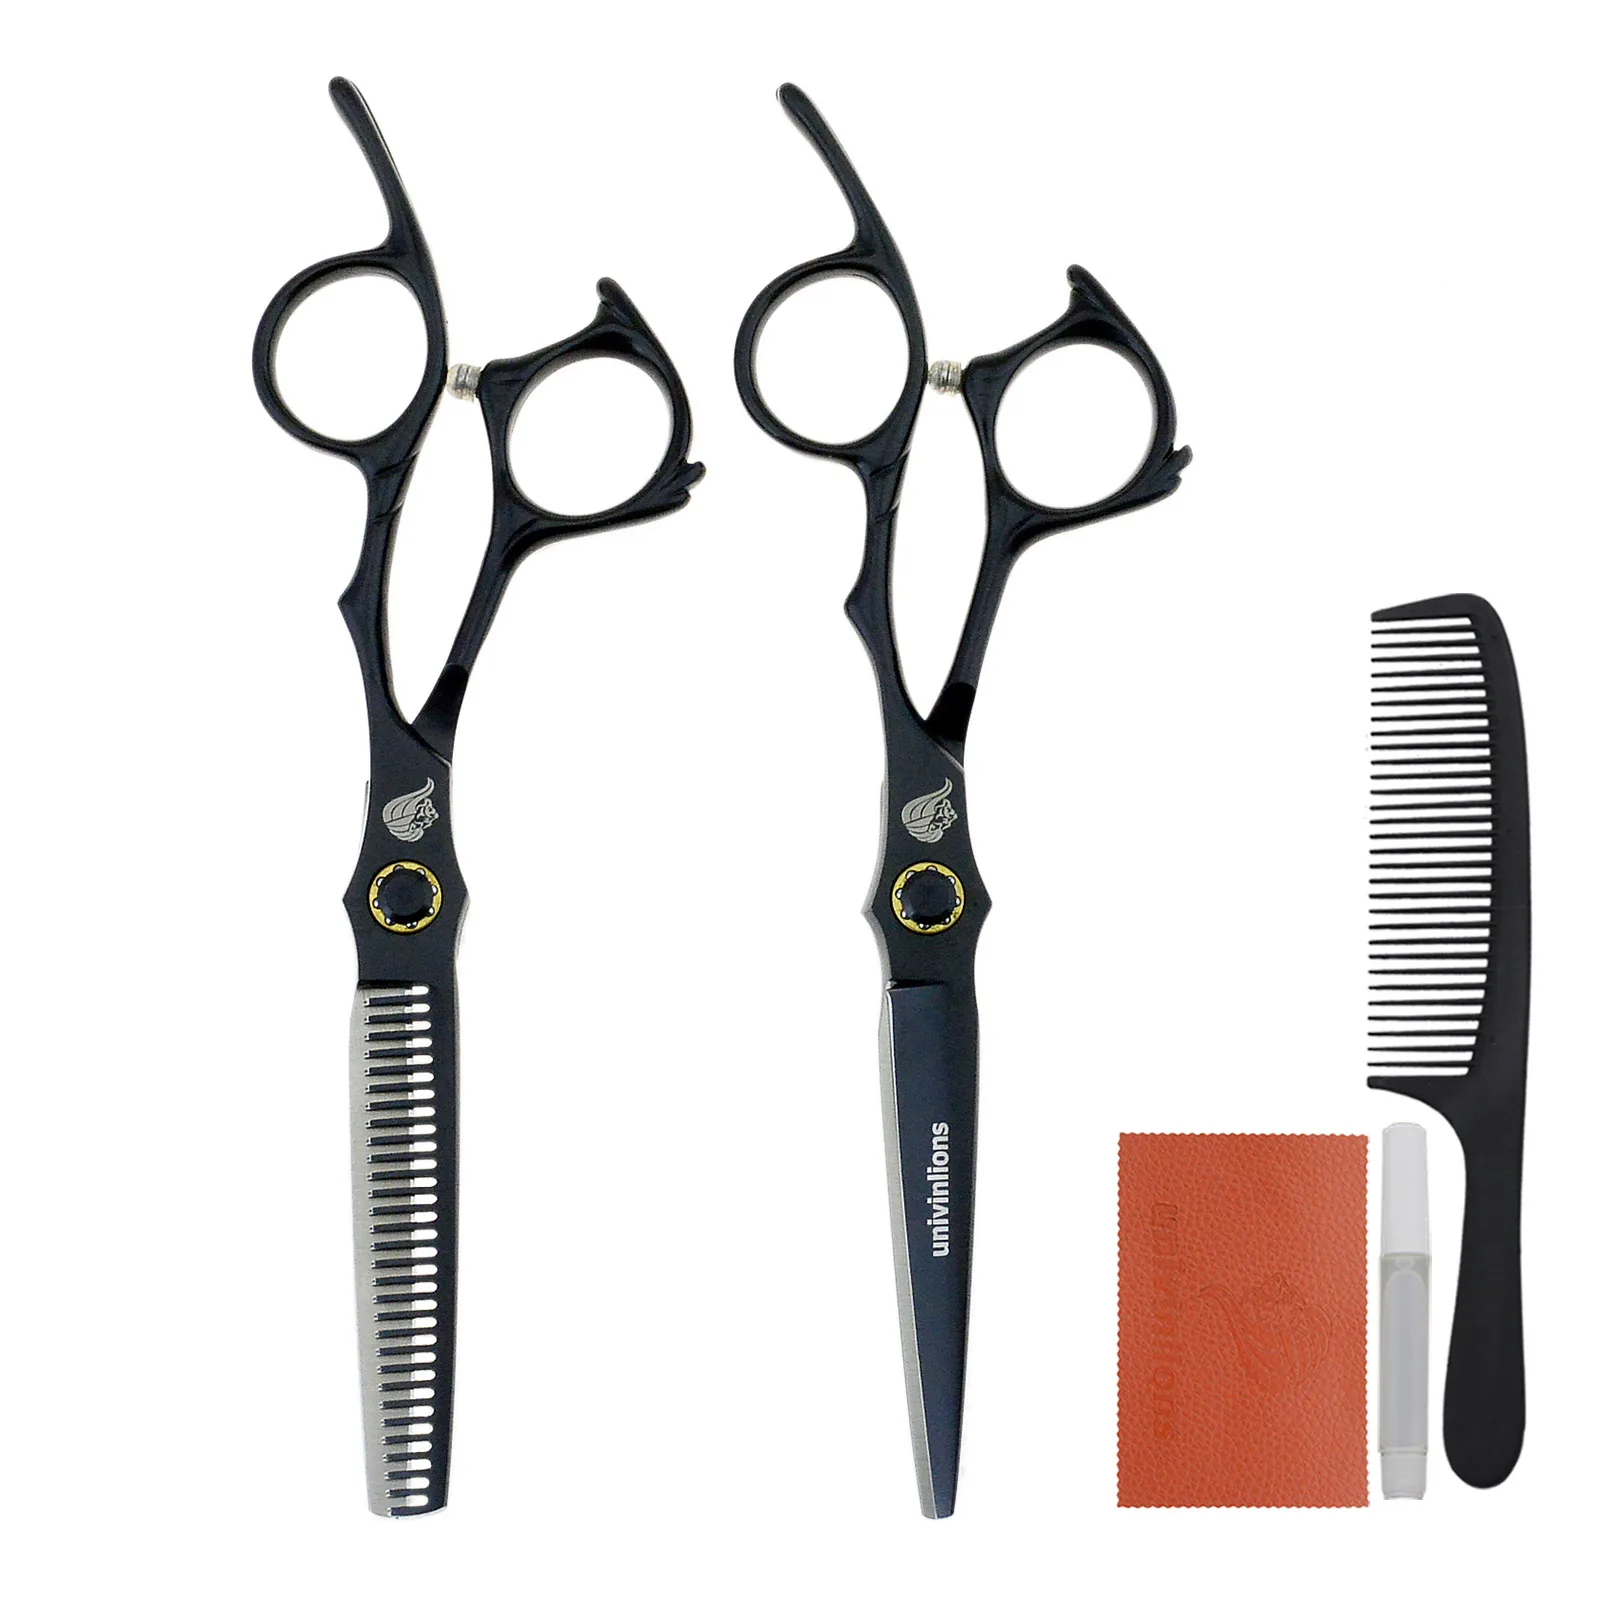 

6" Professional Hairdressing Scissors Kit Hair Cutting Scissors Thinning Shears Barber Accessories Salon Tools Hair Clipper